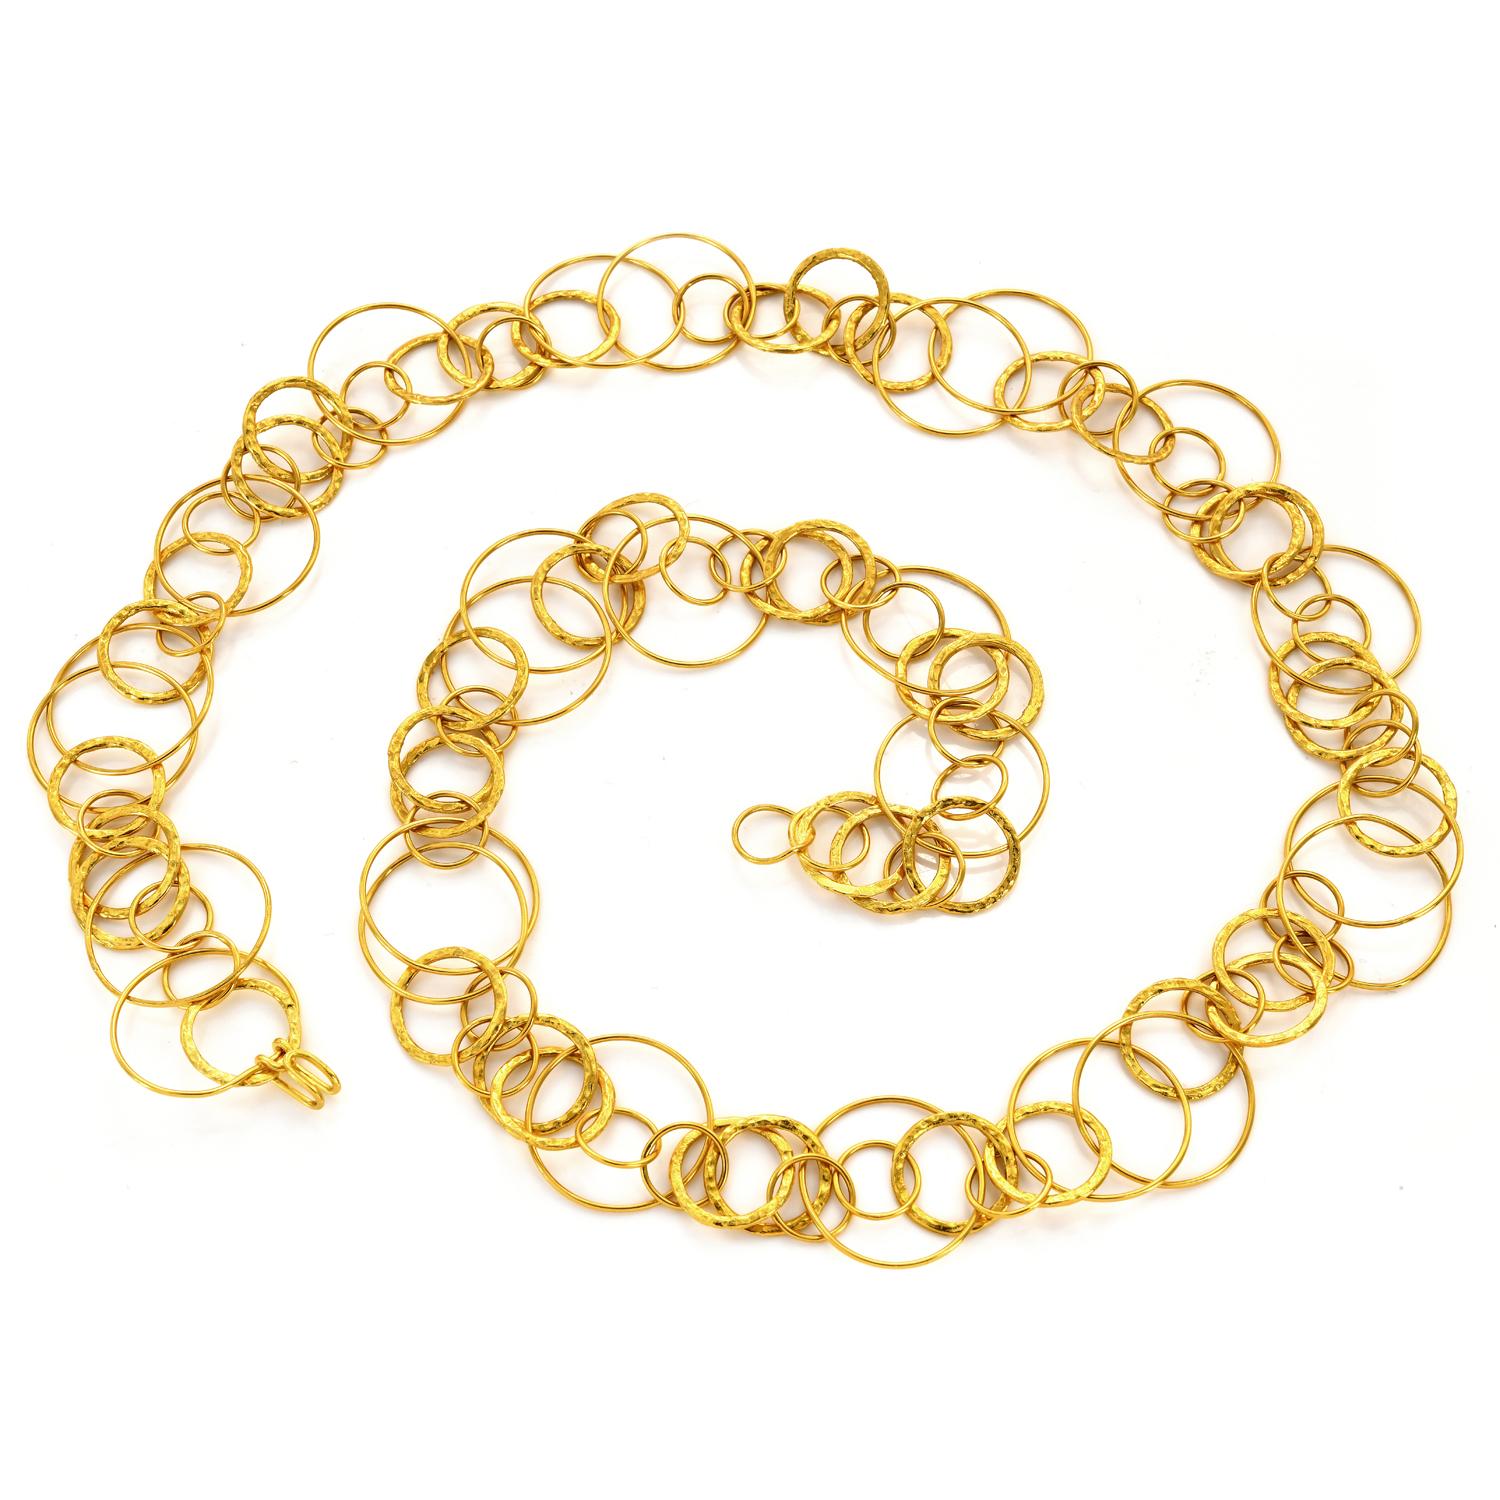 Women's Spitzer & Furman 18k Yellow Gold Multi Hoop Round Link Chain Necklace For Sale